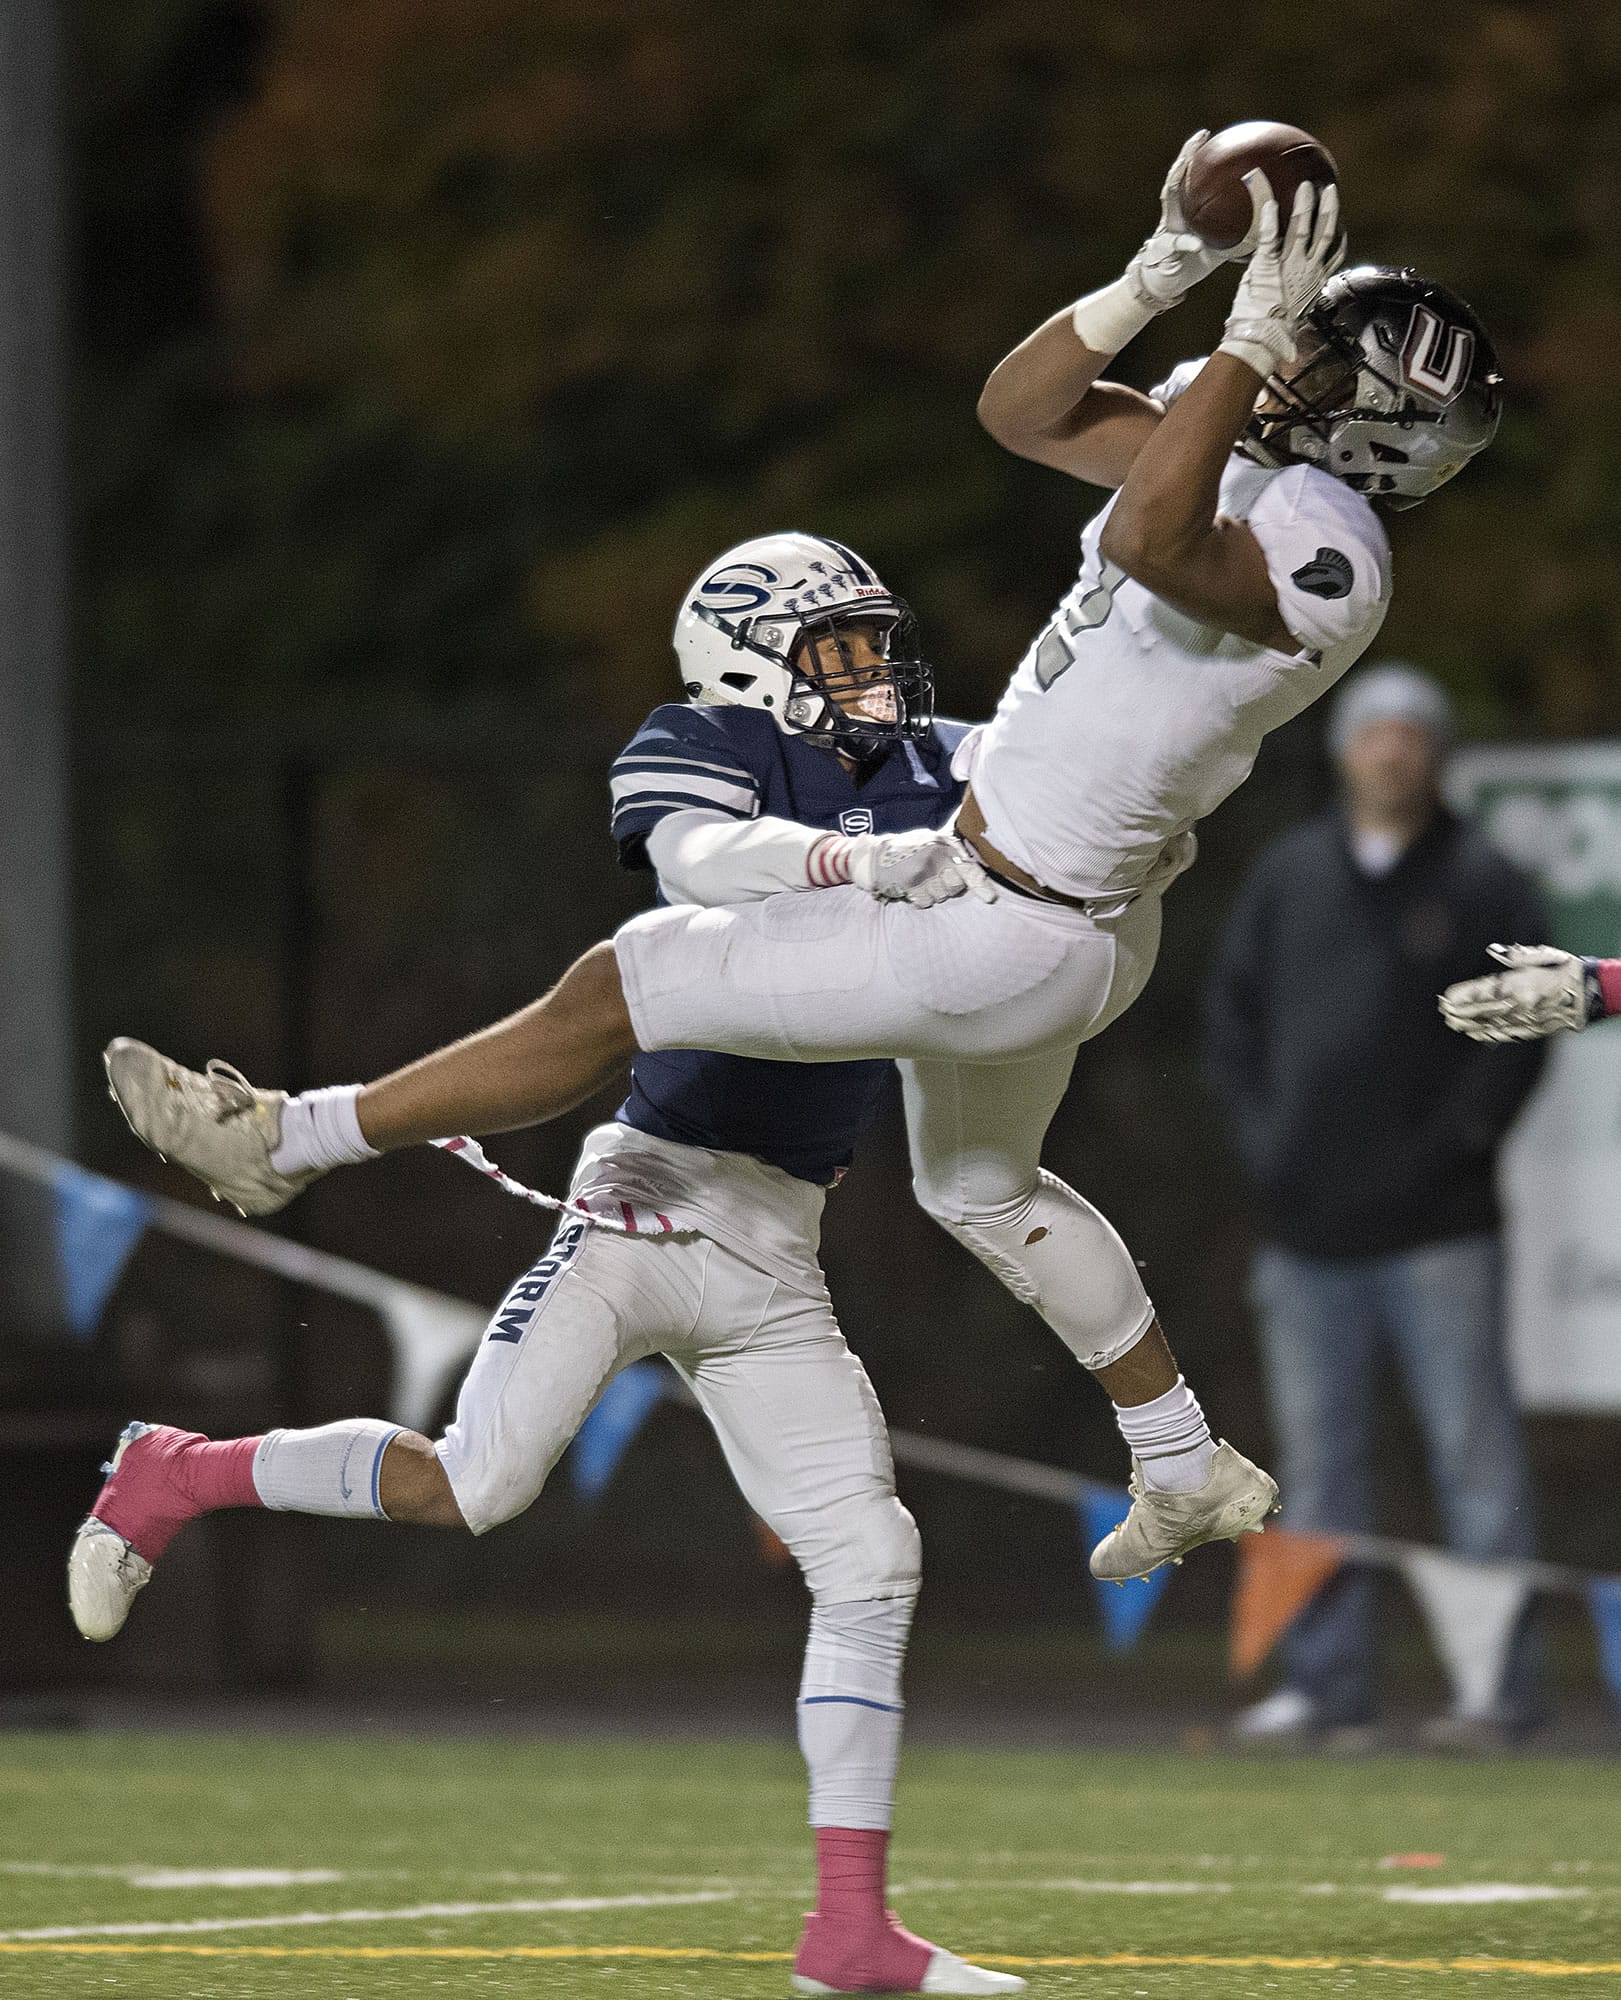 Union's Alishawuan Taylor (2) attempts to hang onto a pass while defended by Skyview's Tavis Pinkney (6) in the first quarter at Kiggins Bowl on Friday night, Oct. 20, 2017.